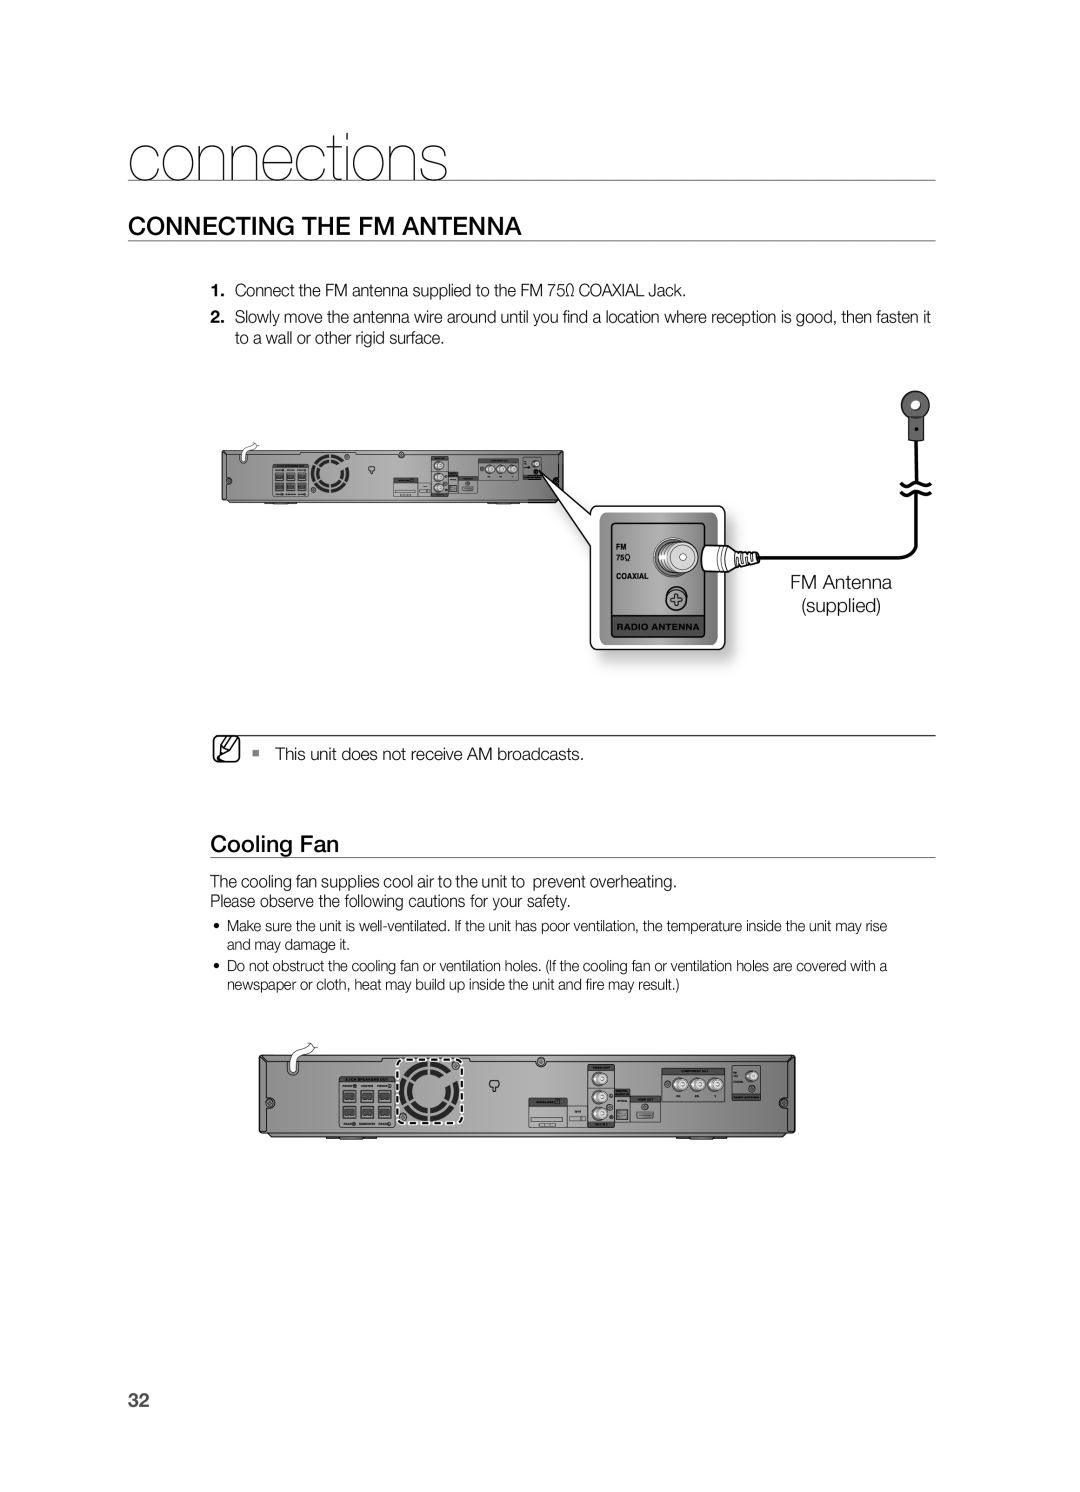 Samsung HT-TZ312 manual COnnECtinG tHE fm antEnna, Cooling fan, connections 